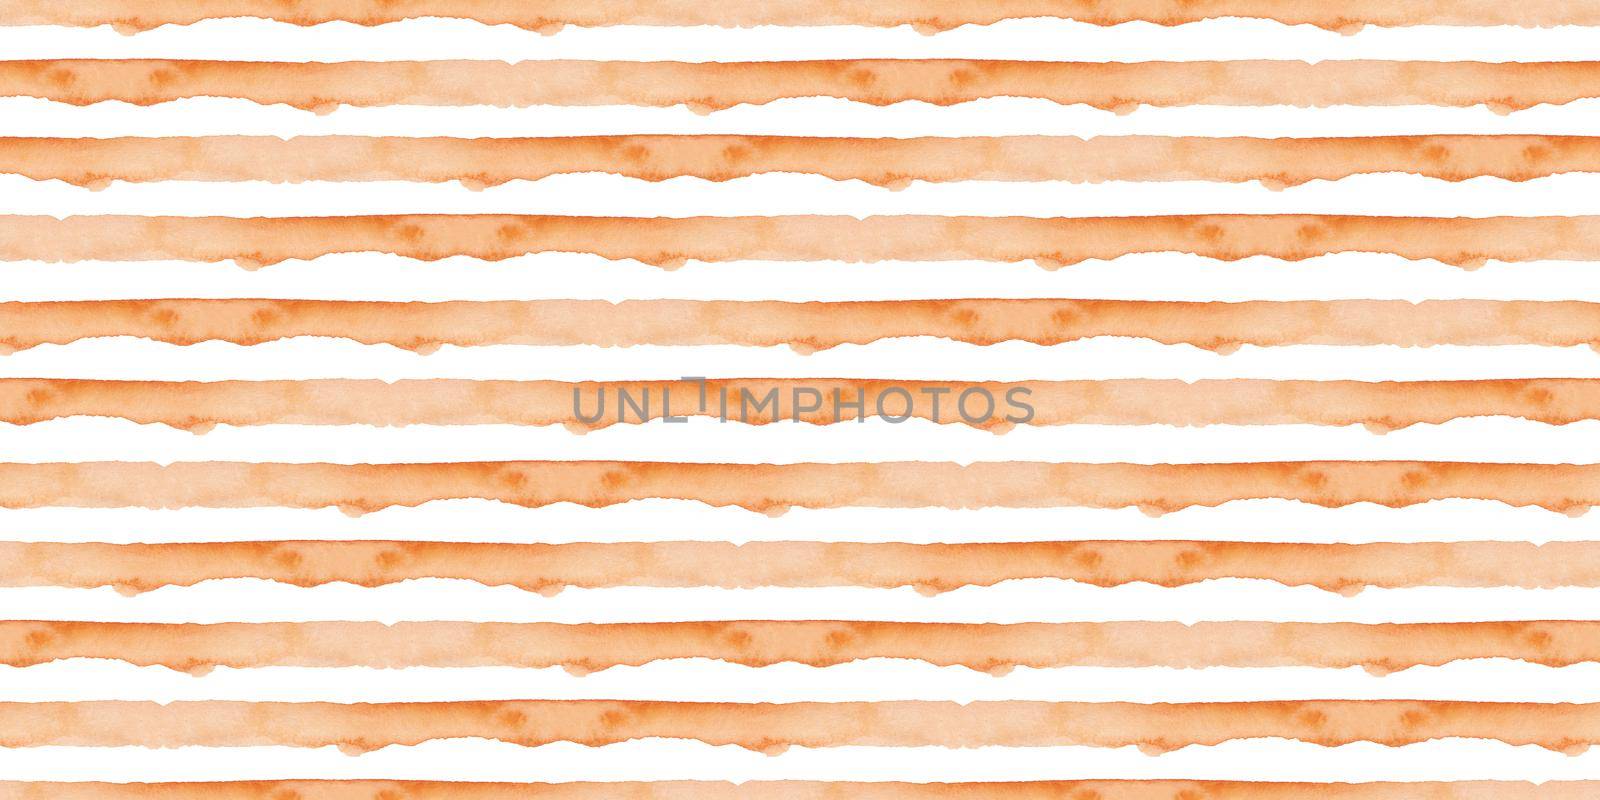 Orange Abstract Watercolor Geometric Background. Seamless Pattern with Stripes. Handmade Texture for Fabric Design and Wallpaper. by DesignAB